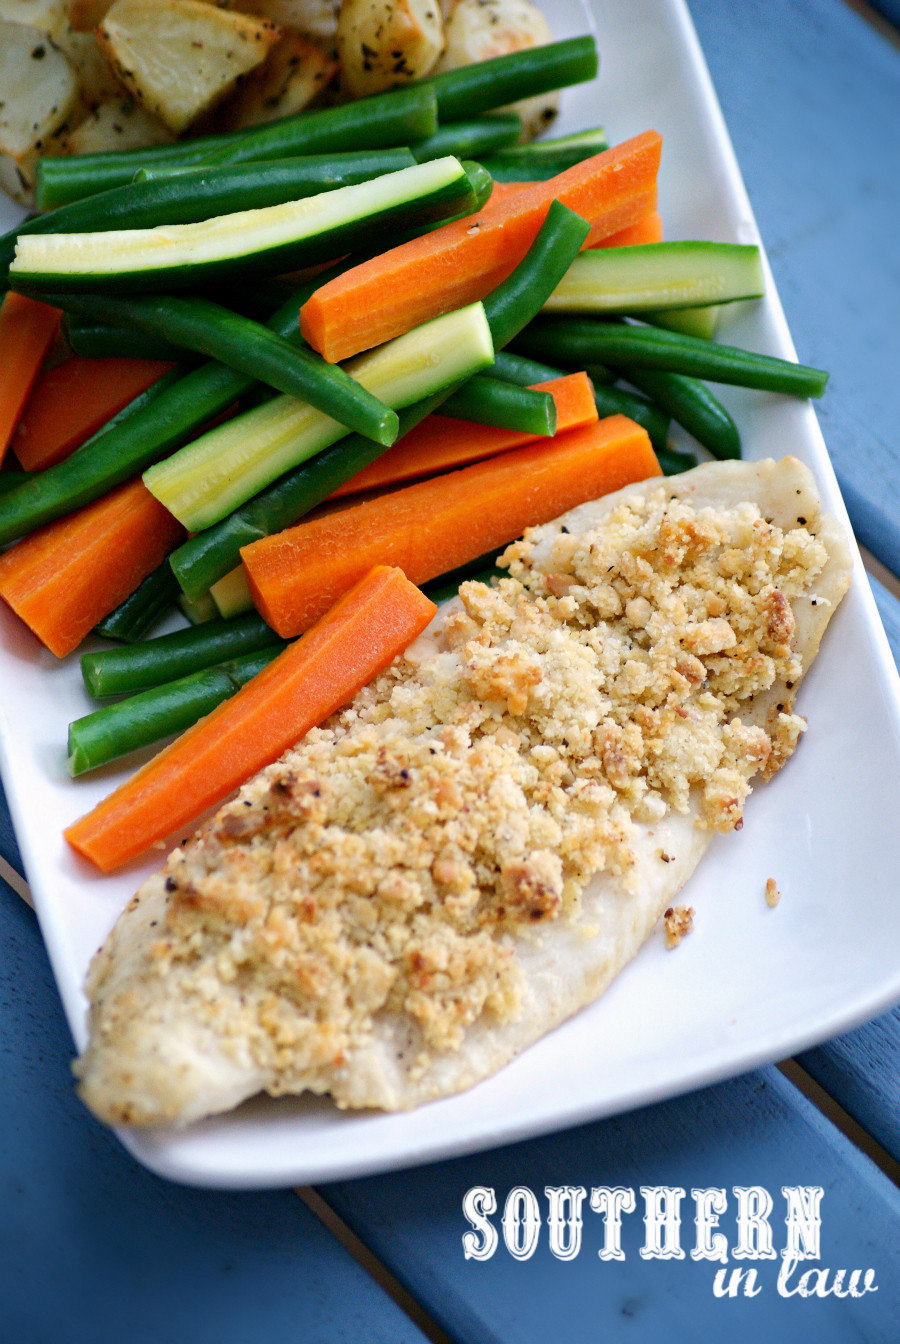 Baked Fish Recipes Healthy
 Southern In Law Recipe Healthy Macadamia Crusted Baked Fish